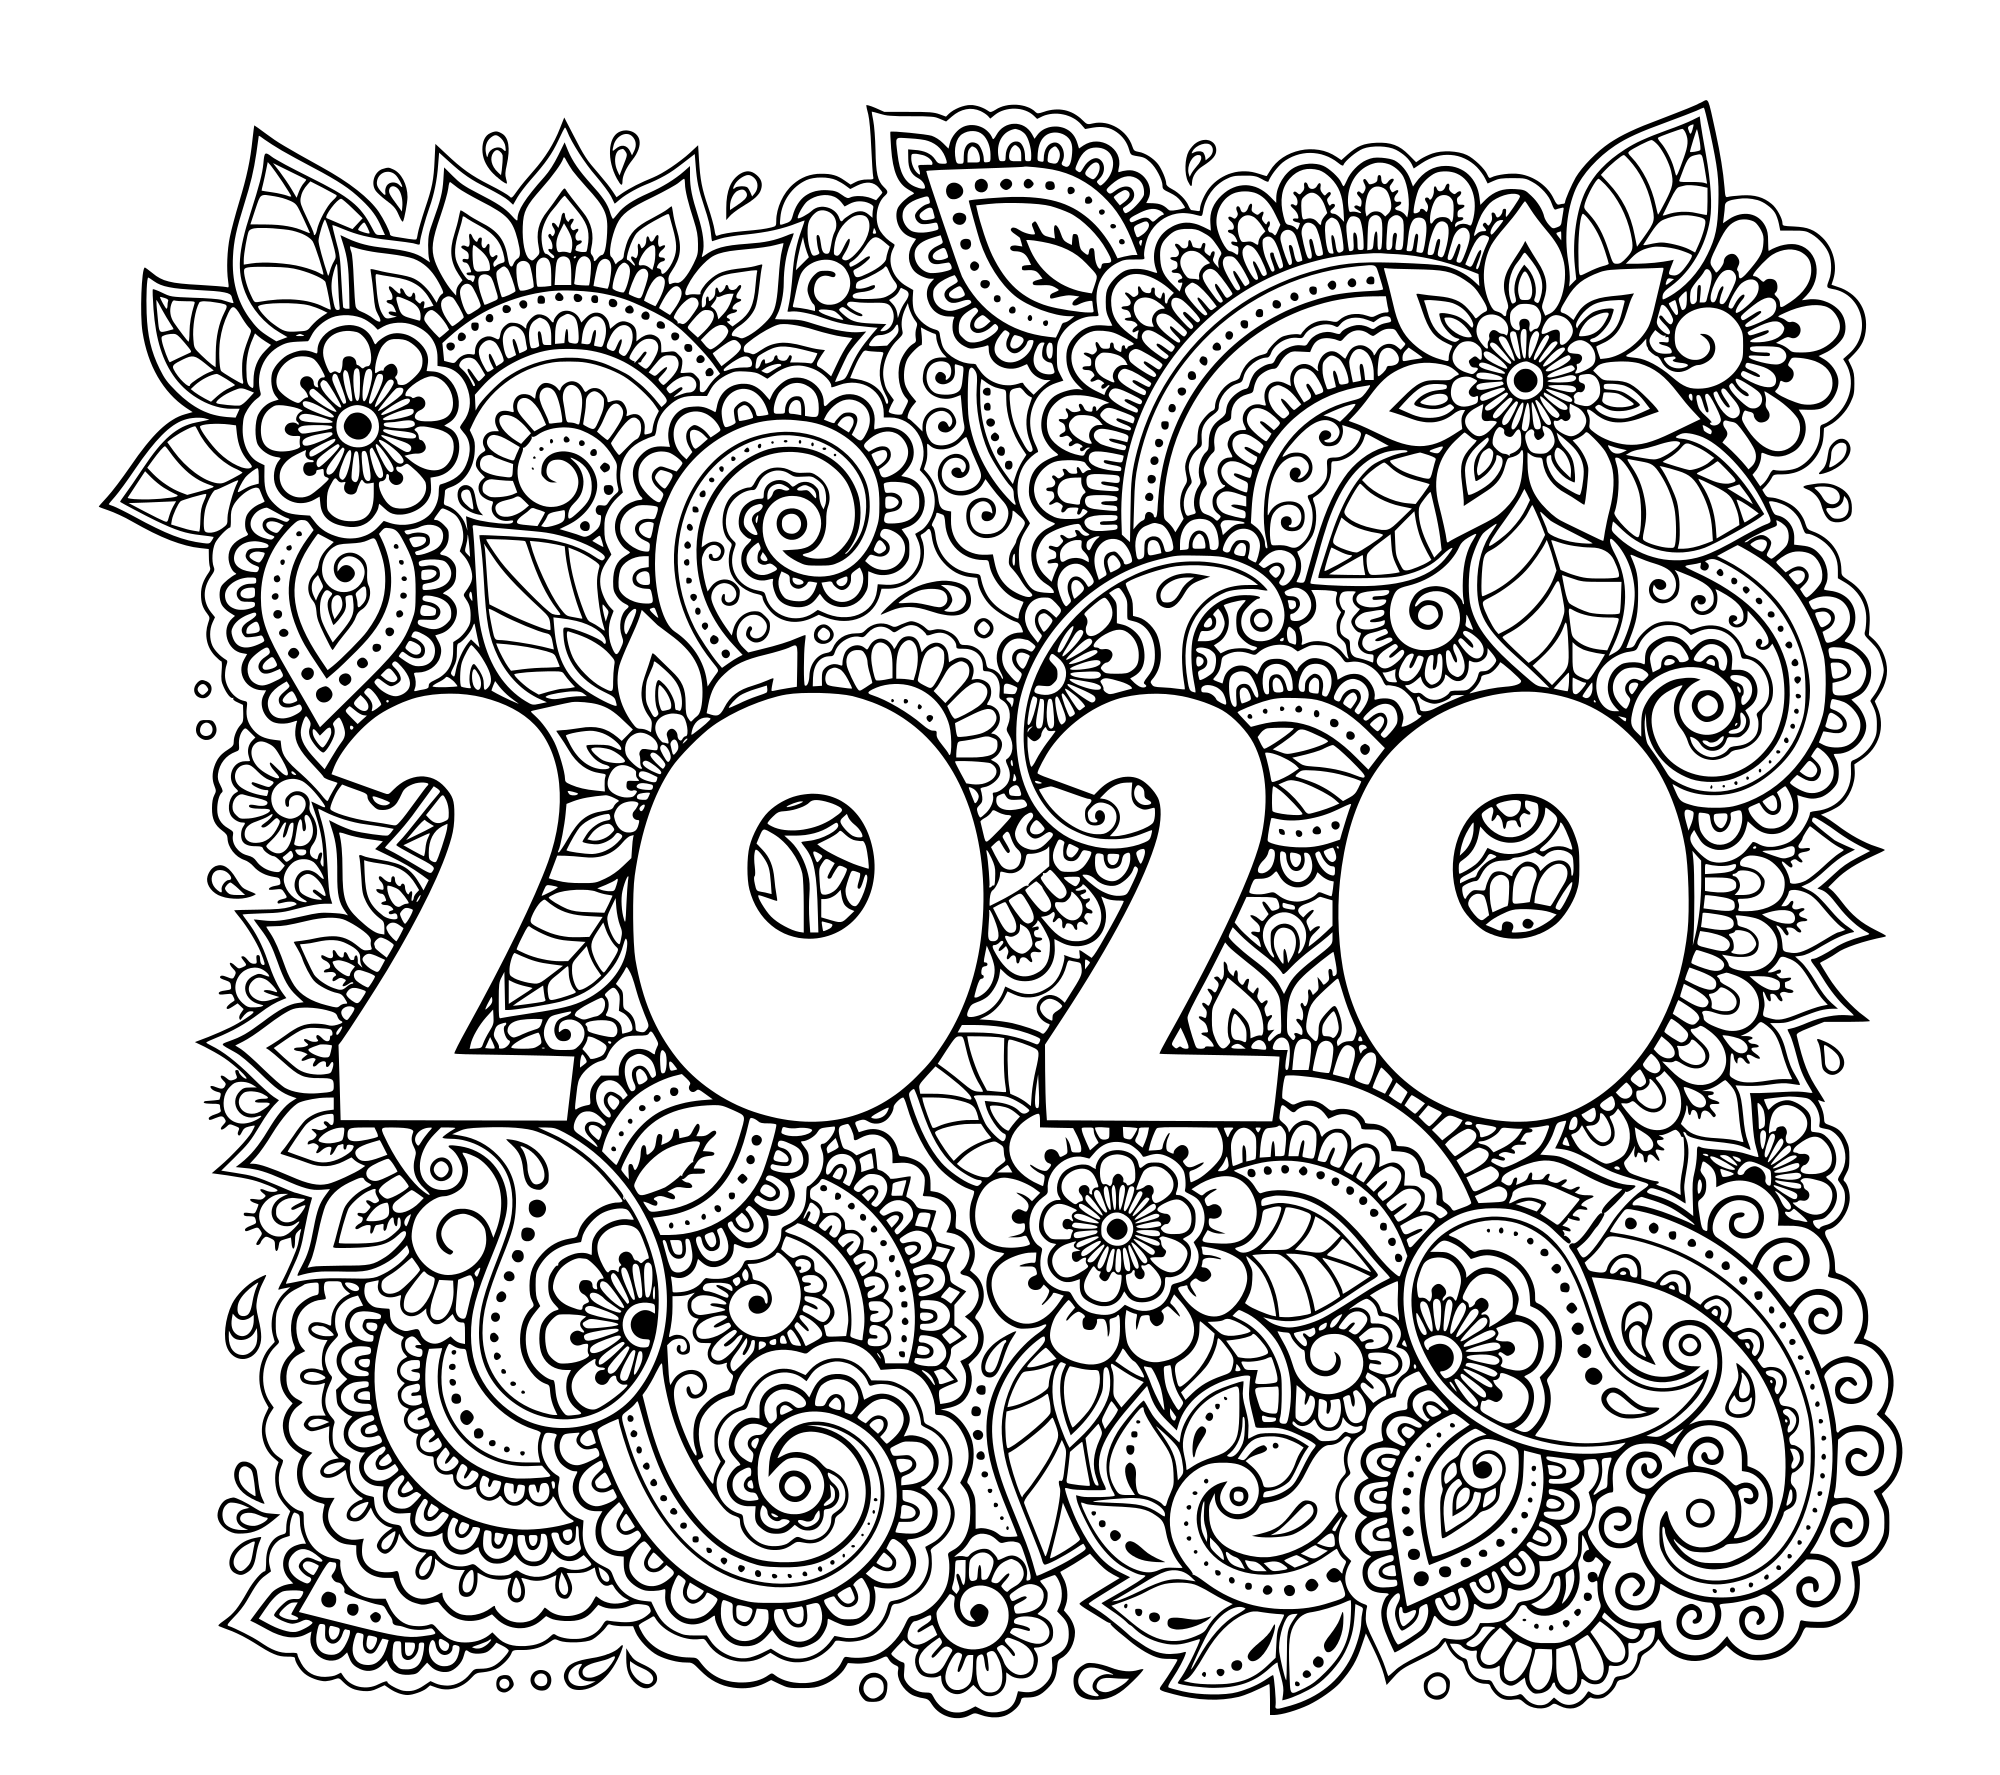 New Year 2020 Highly Detailed Decorative Floral Pattern Coloring Page